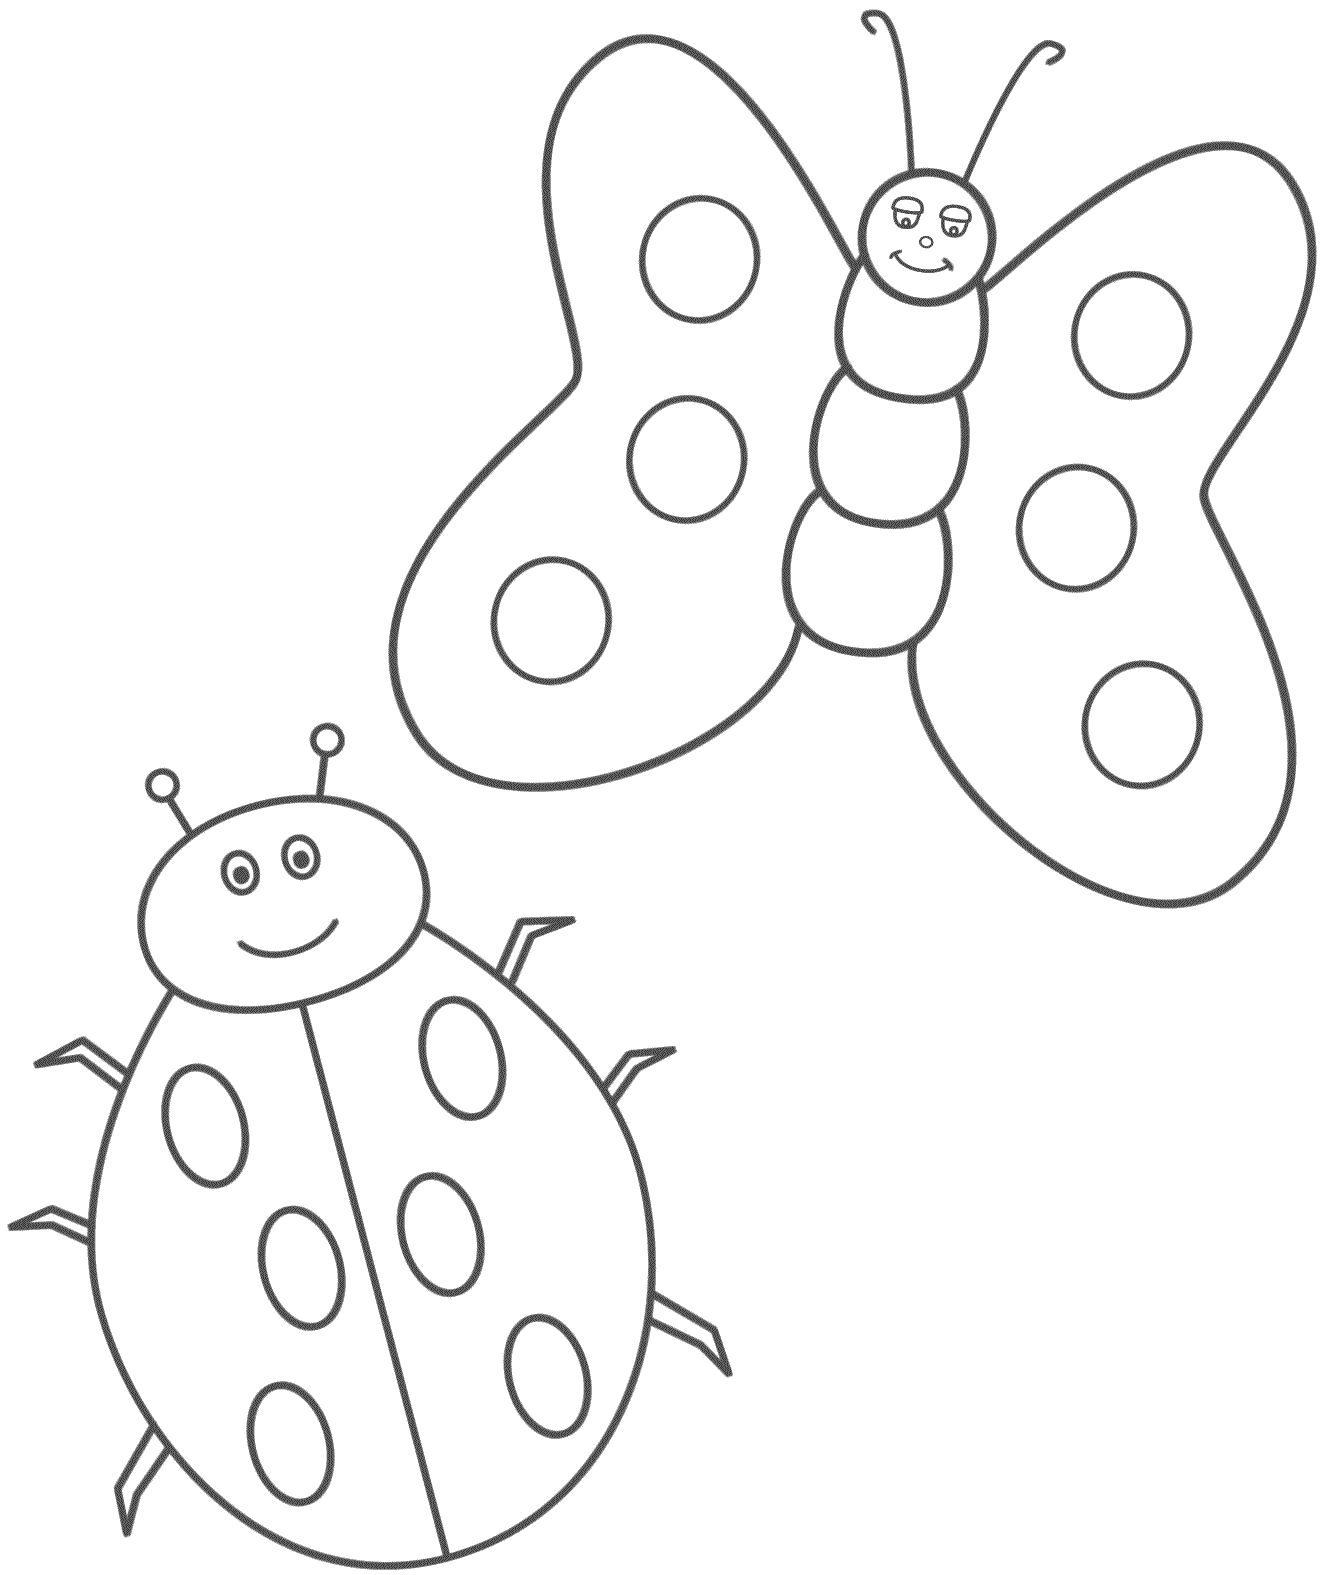 Ladybug and Butterfly - Coloring Page (Insects)